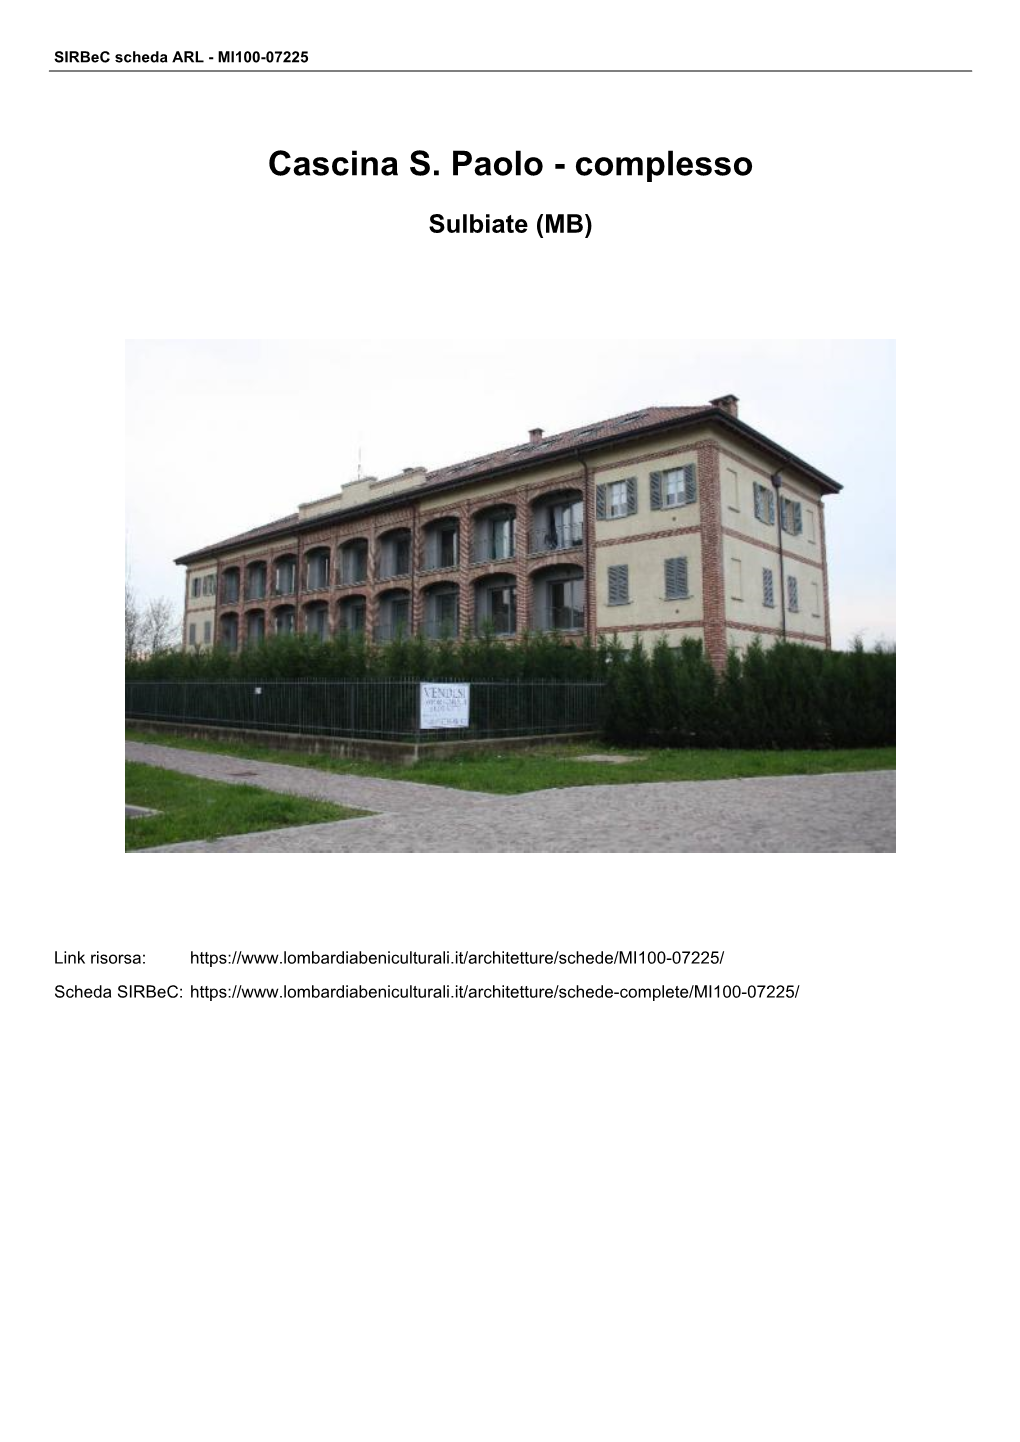 Cascina S. Paolo - Complesso